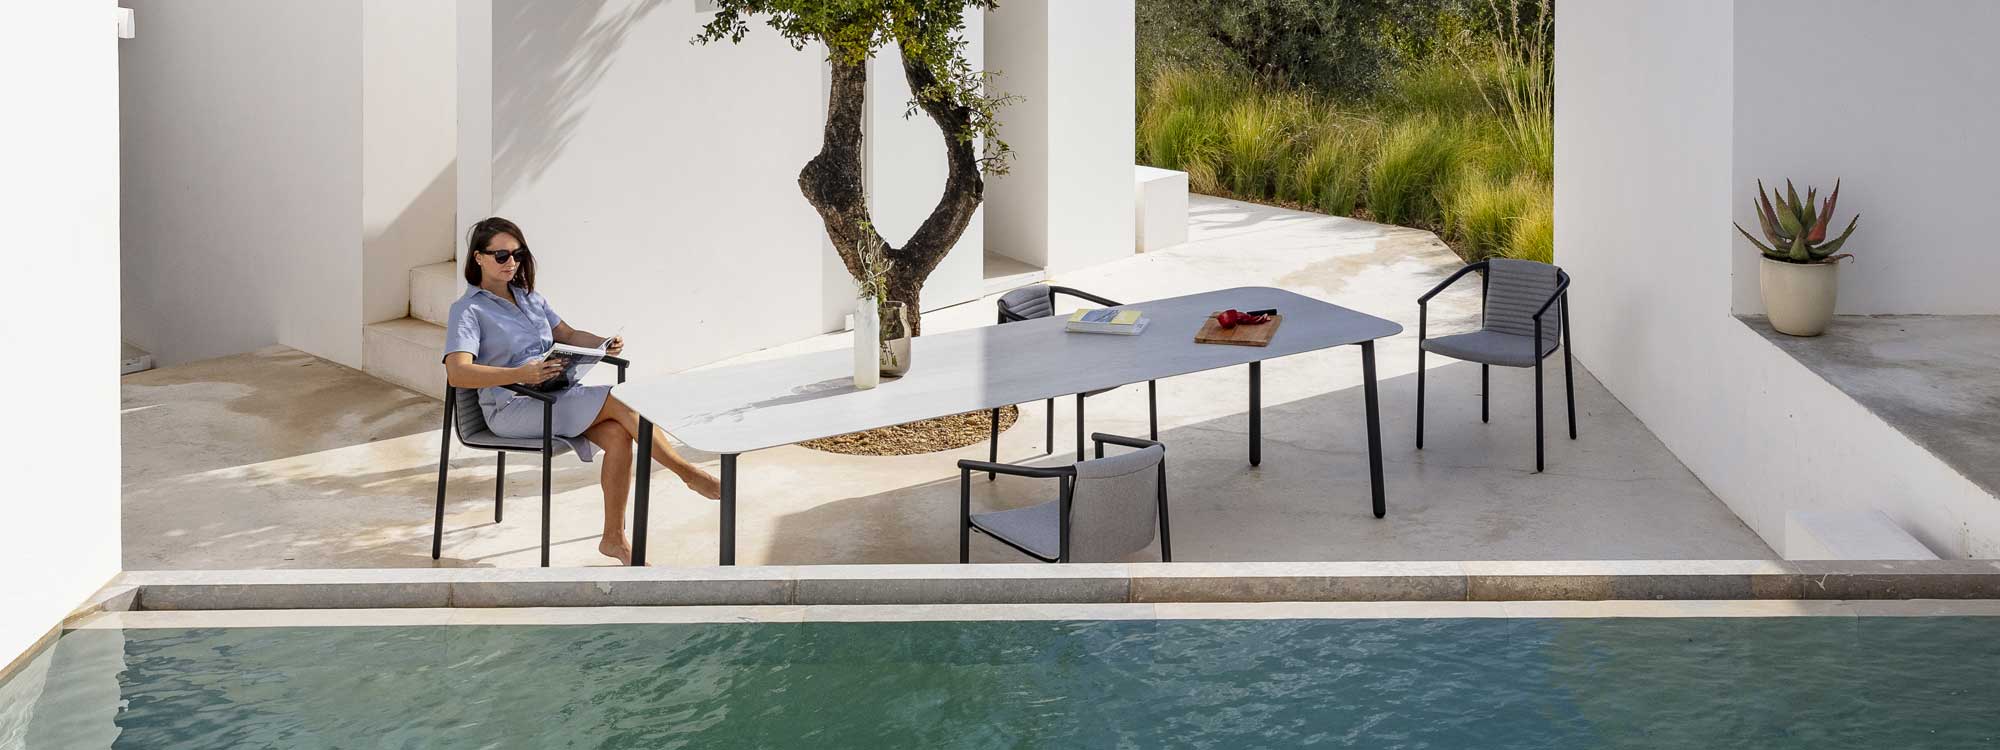 Birdseye view of Duct Round outdoor dining chair and Starling garden table between olive tree and swimming pool